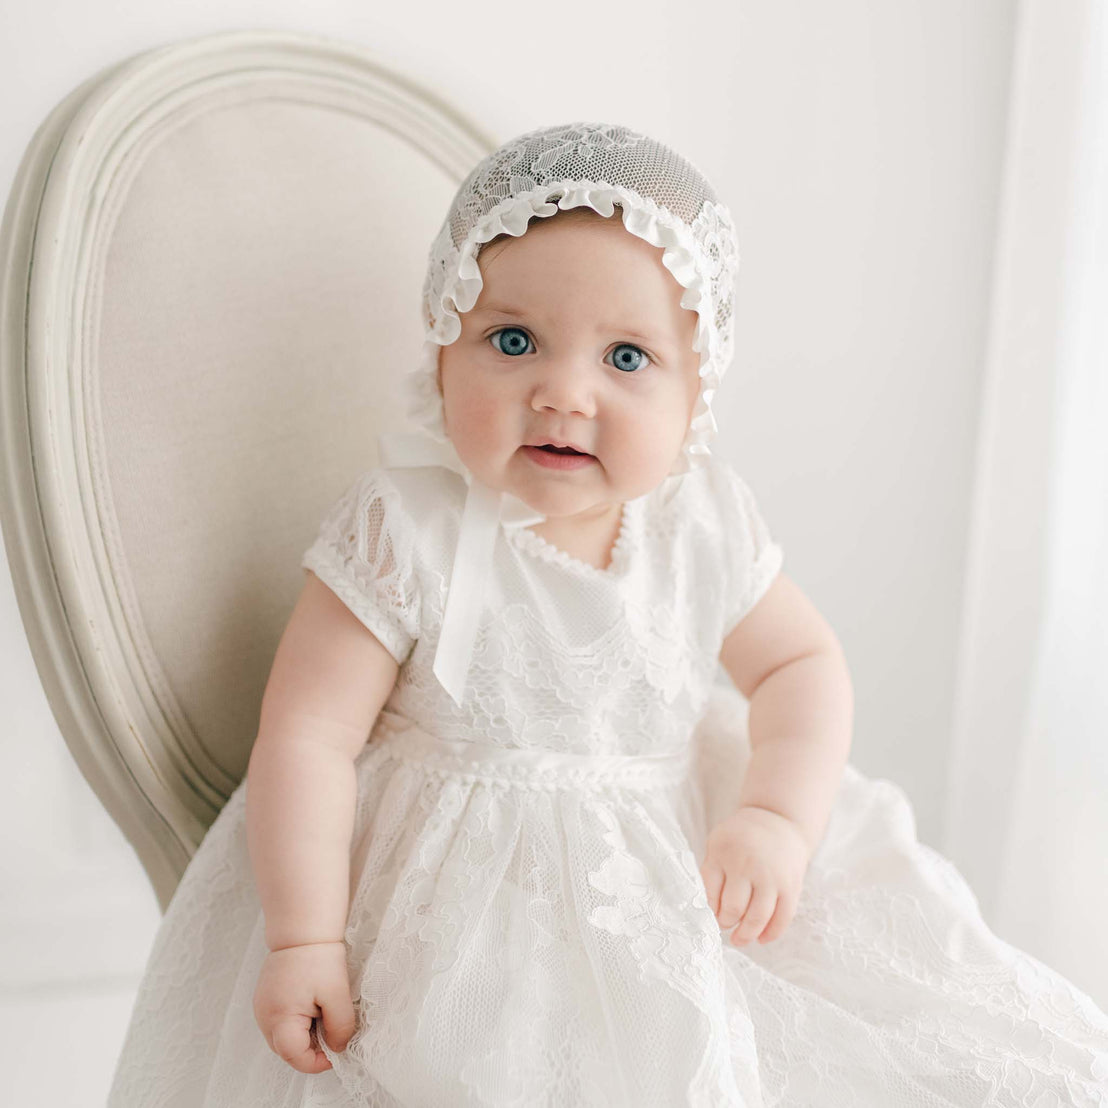 A baby sits on a beige upholstered chair, wearing a Victoria Puff Sleeve Christening Gown & Bonnet. The baby has blue eyes and is looking towards the camera. The background is softly lit and white, giving a serene and classic feel to the portrait.